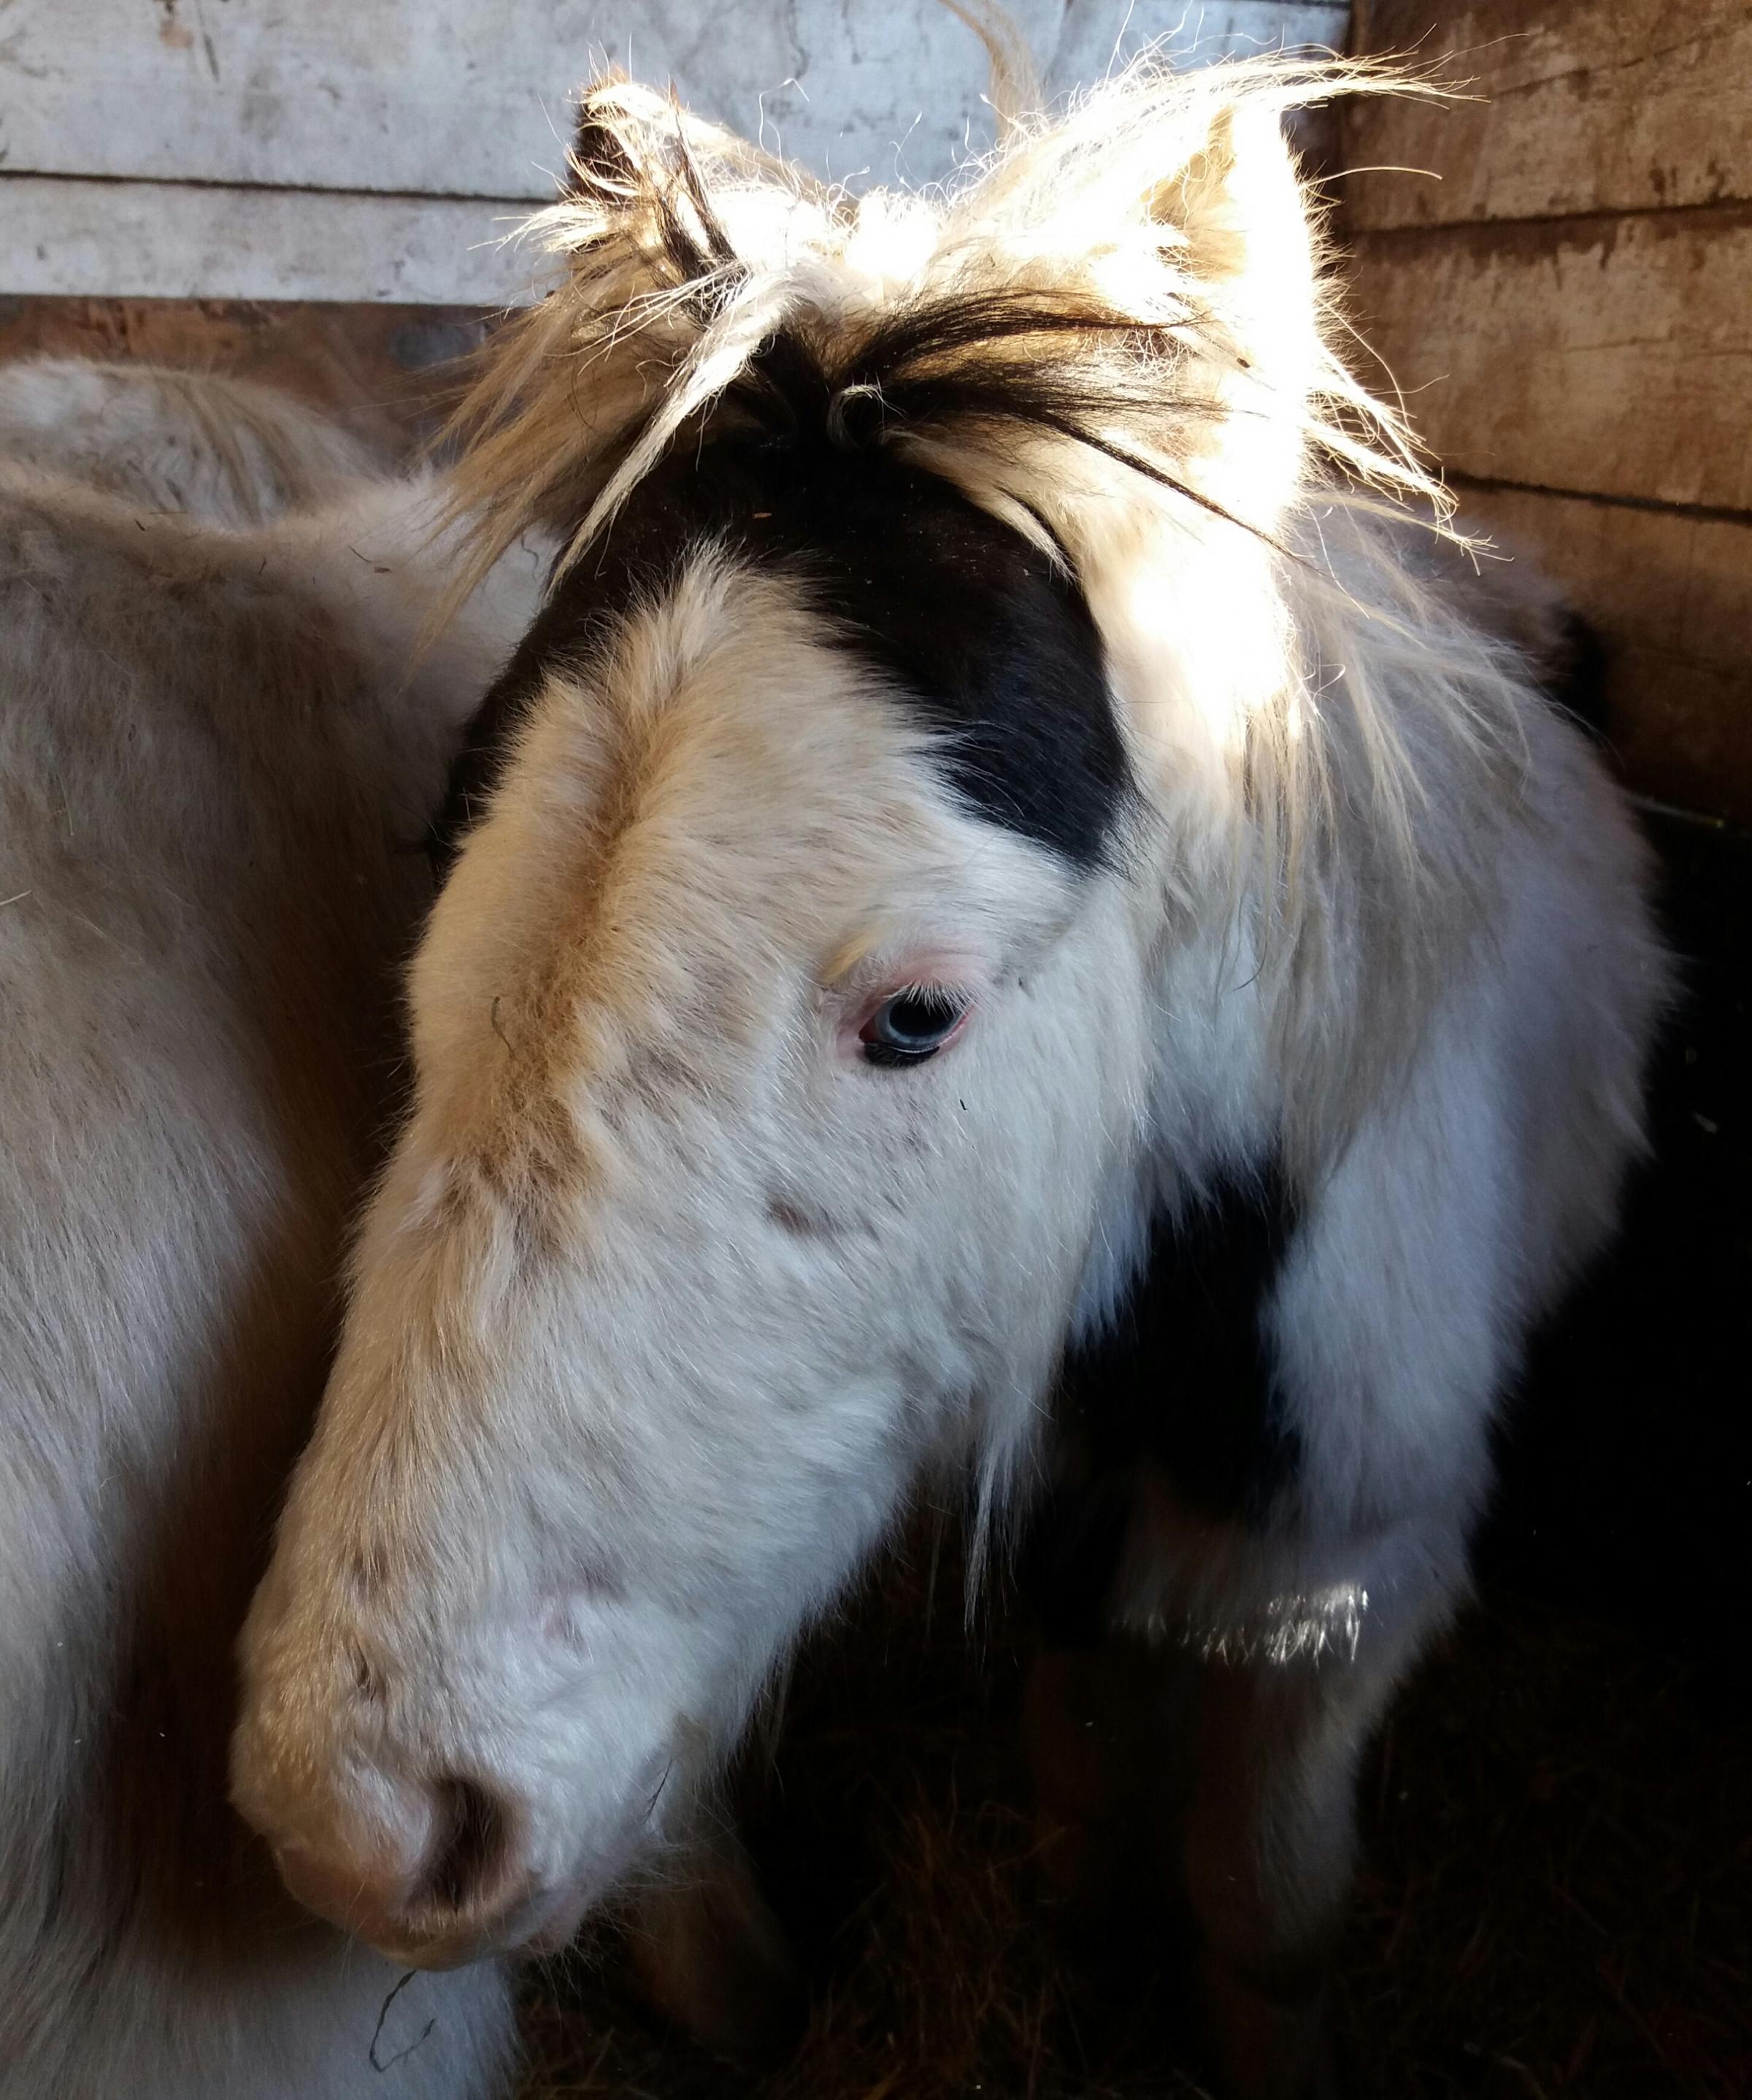 'Skin and bone': Abandoned and neglected ponies rescued by Swanley animal sanctuary